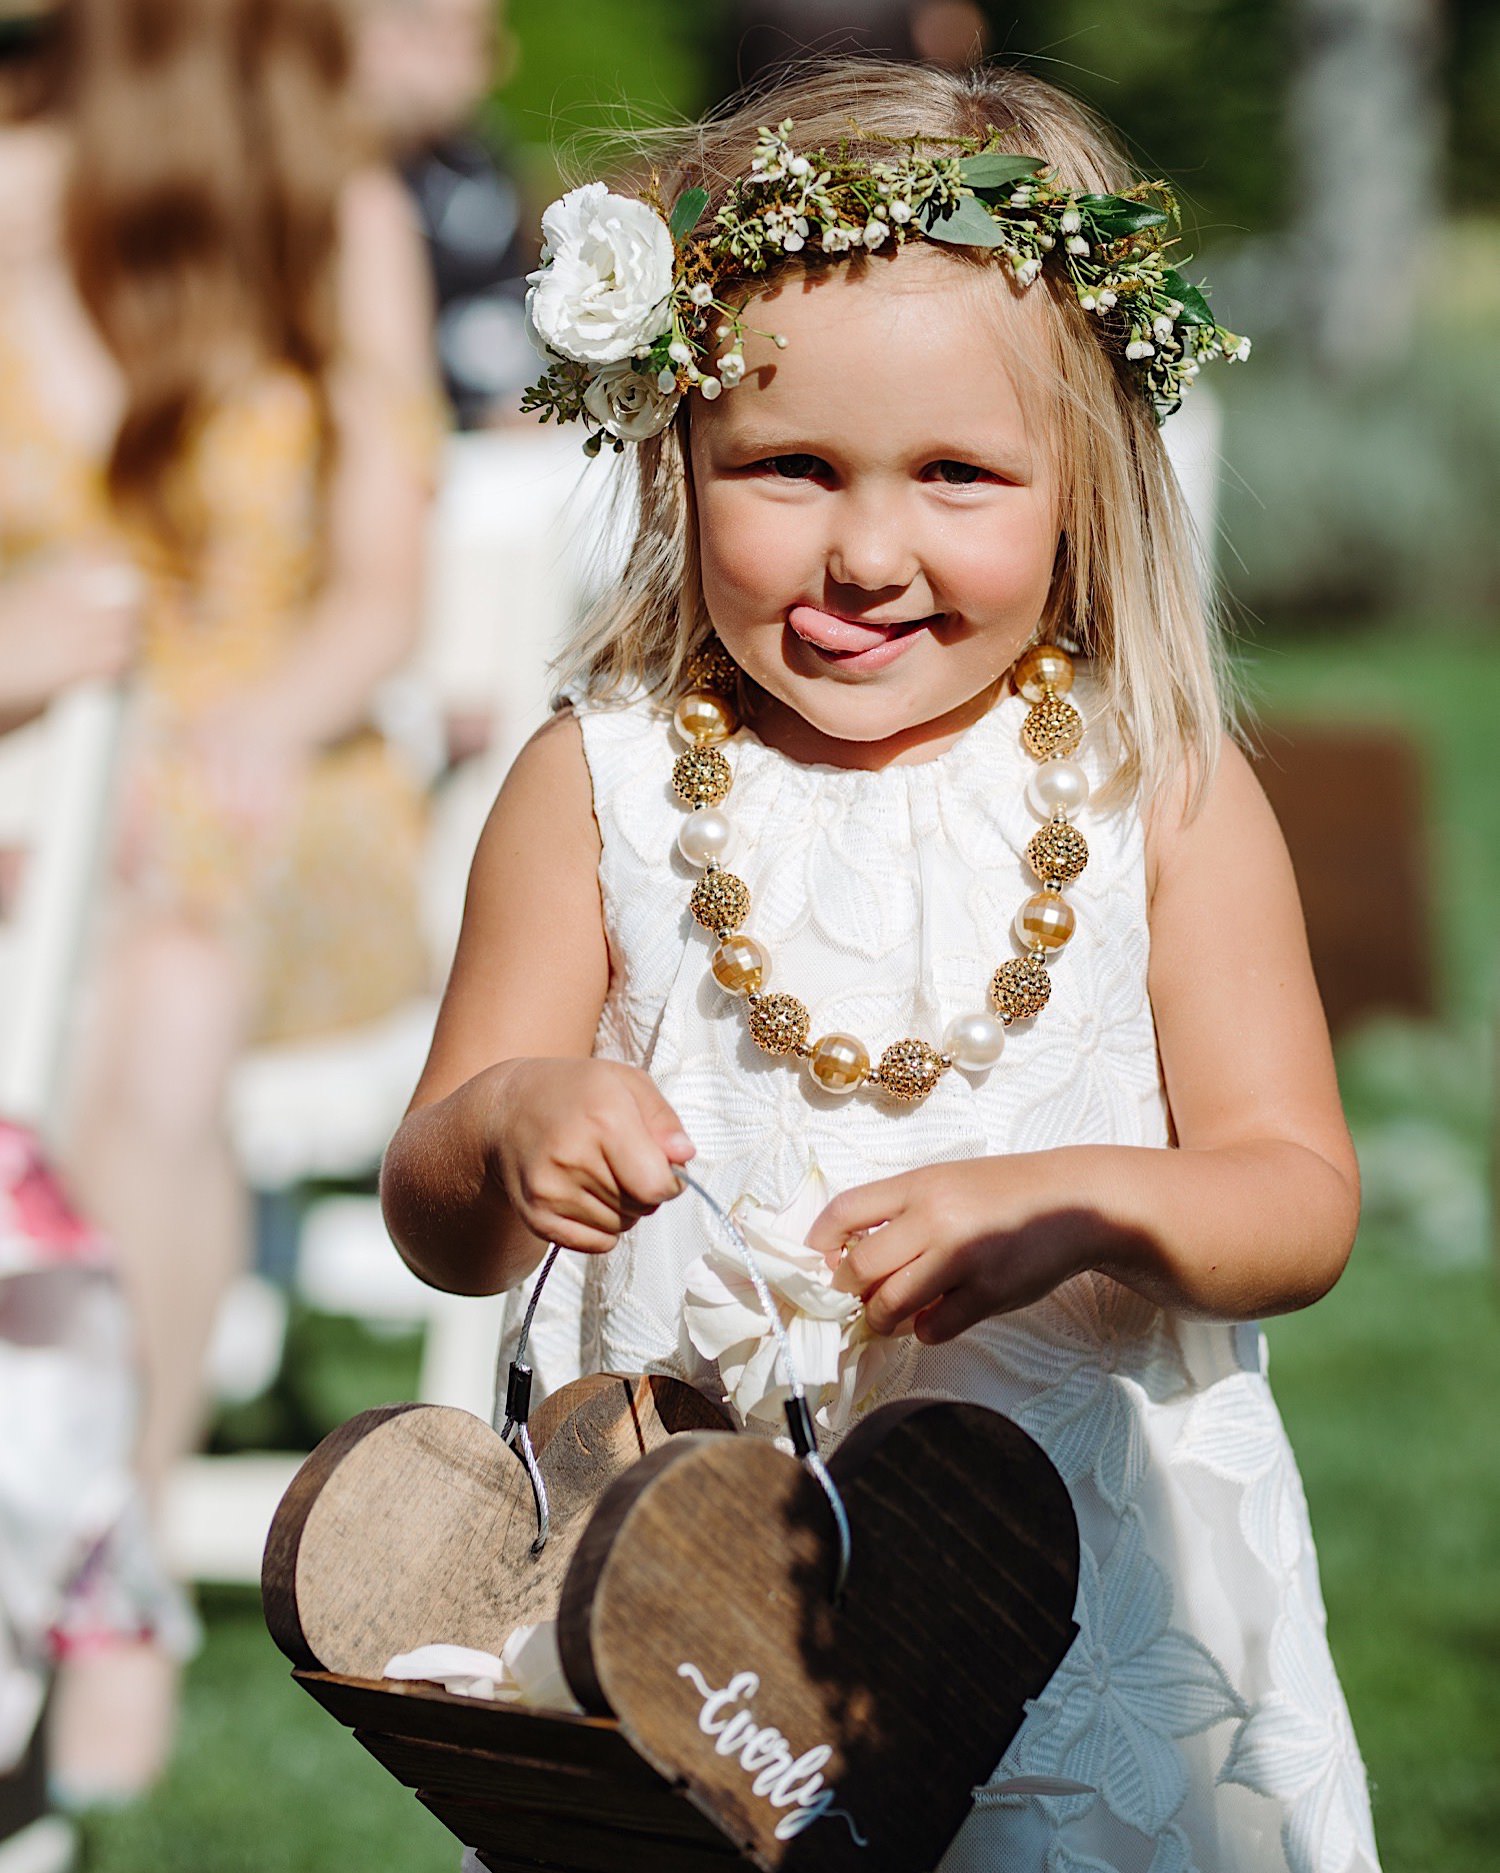 cute flower girl sticking out her tongue walking down the aisle at at wedding ceremony